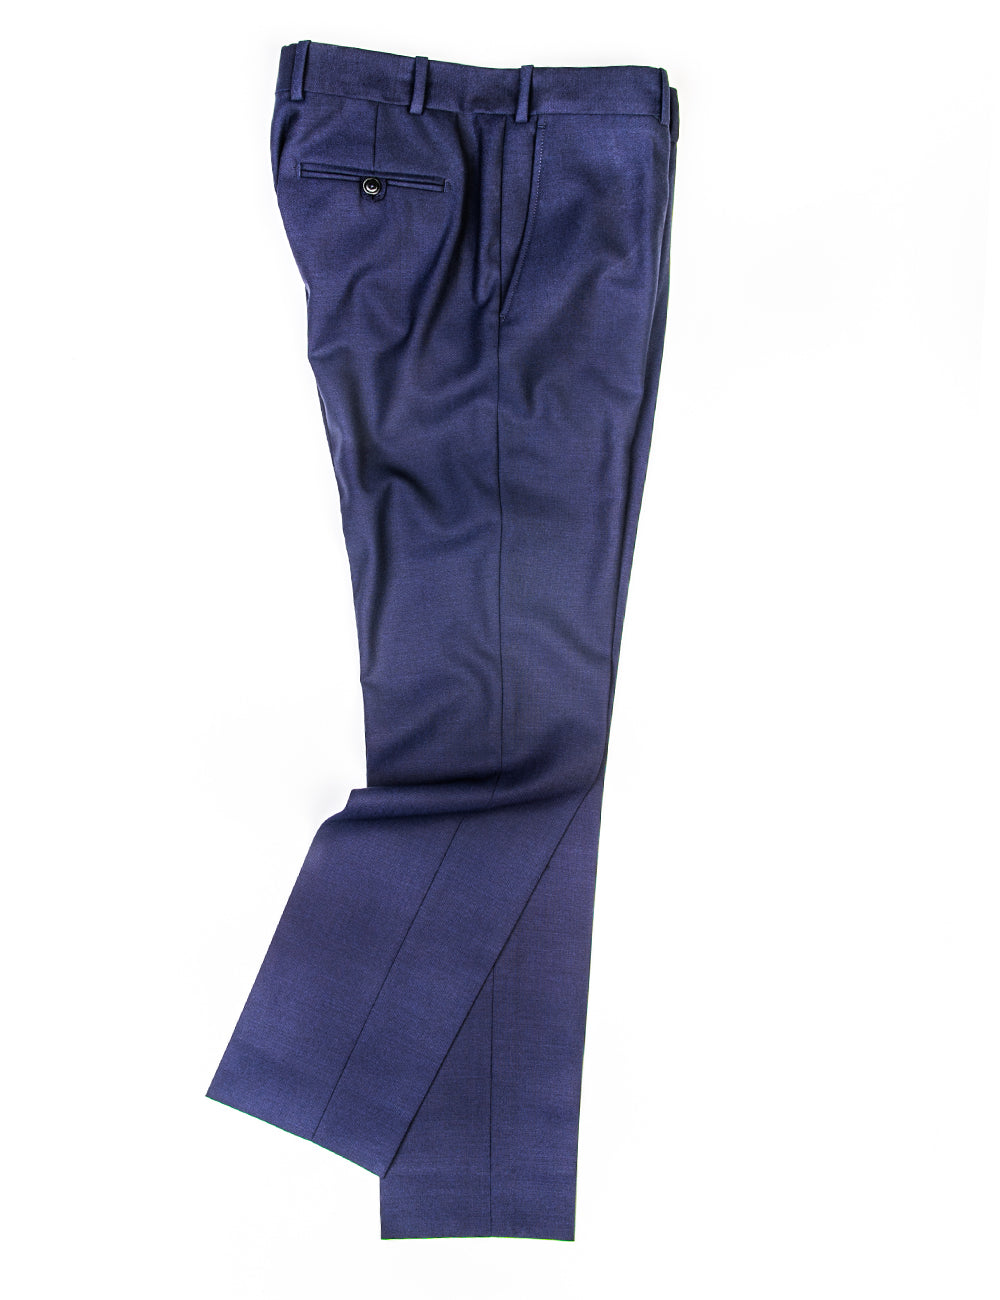 BKT50 Tailored Trouser in Travel-Ready Wool - Vivid Navy